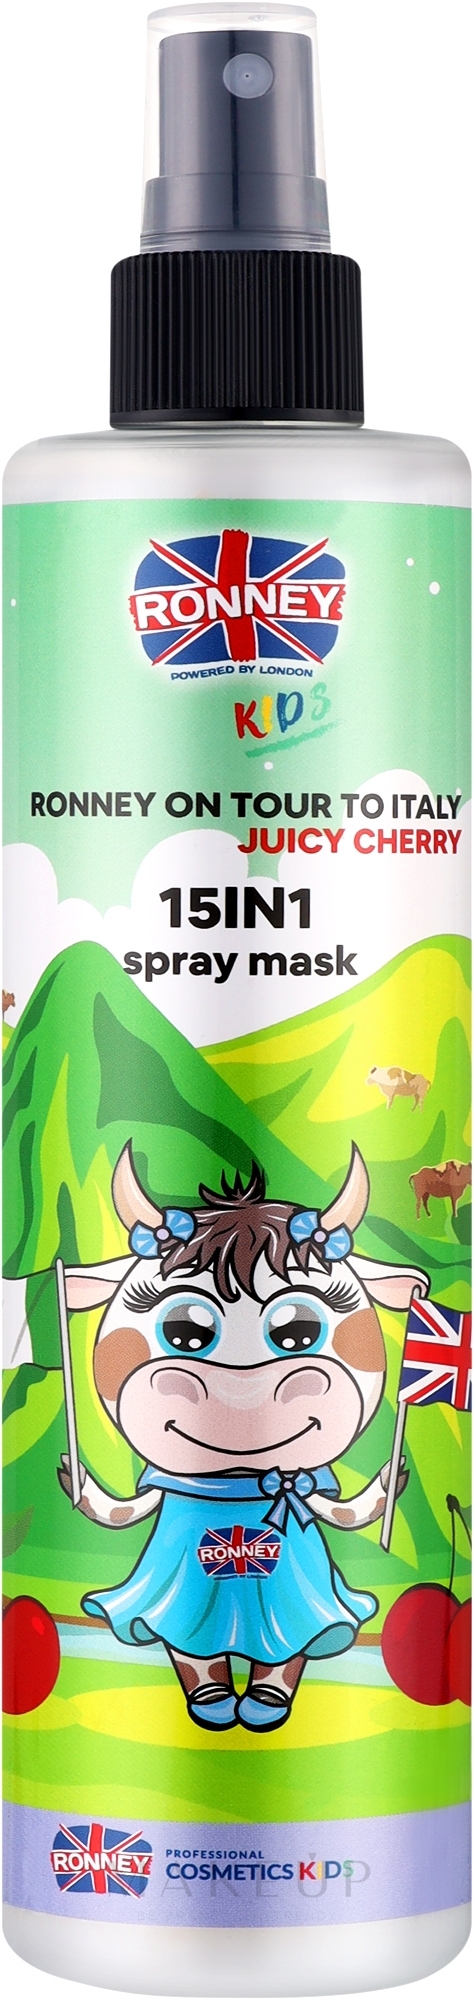 Leave-in-Conditioner für Kinder 15in1 - Ronney Professional Kids On Tour To Italy Juicy Cherry 15In1 — Bild 285 ml